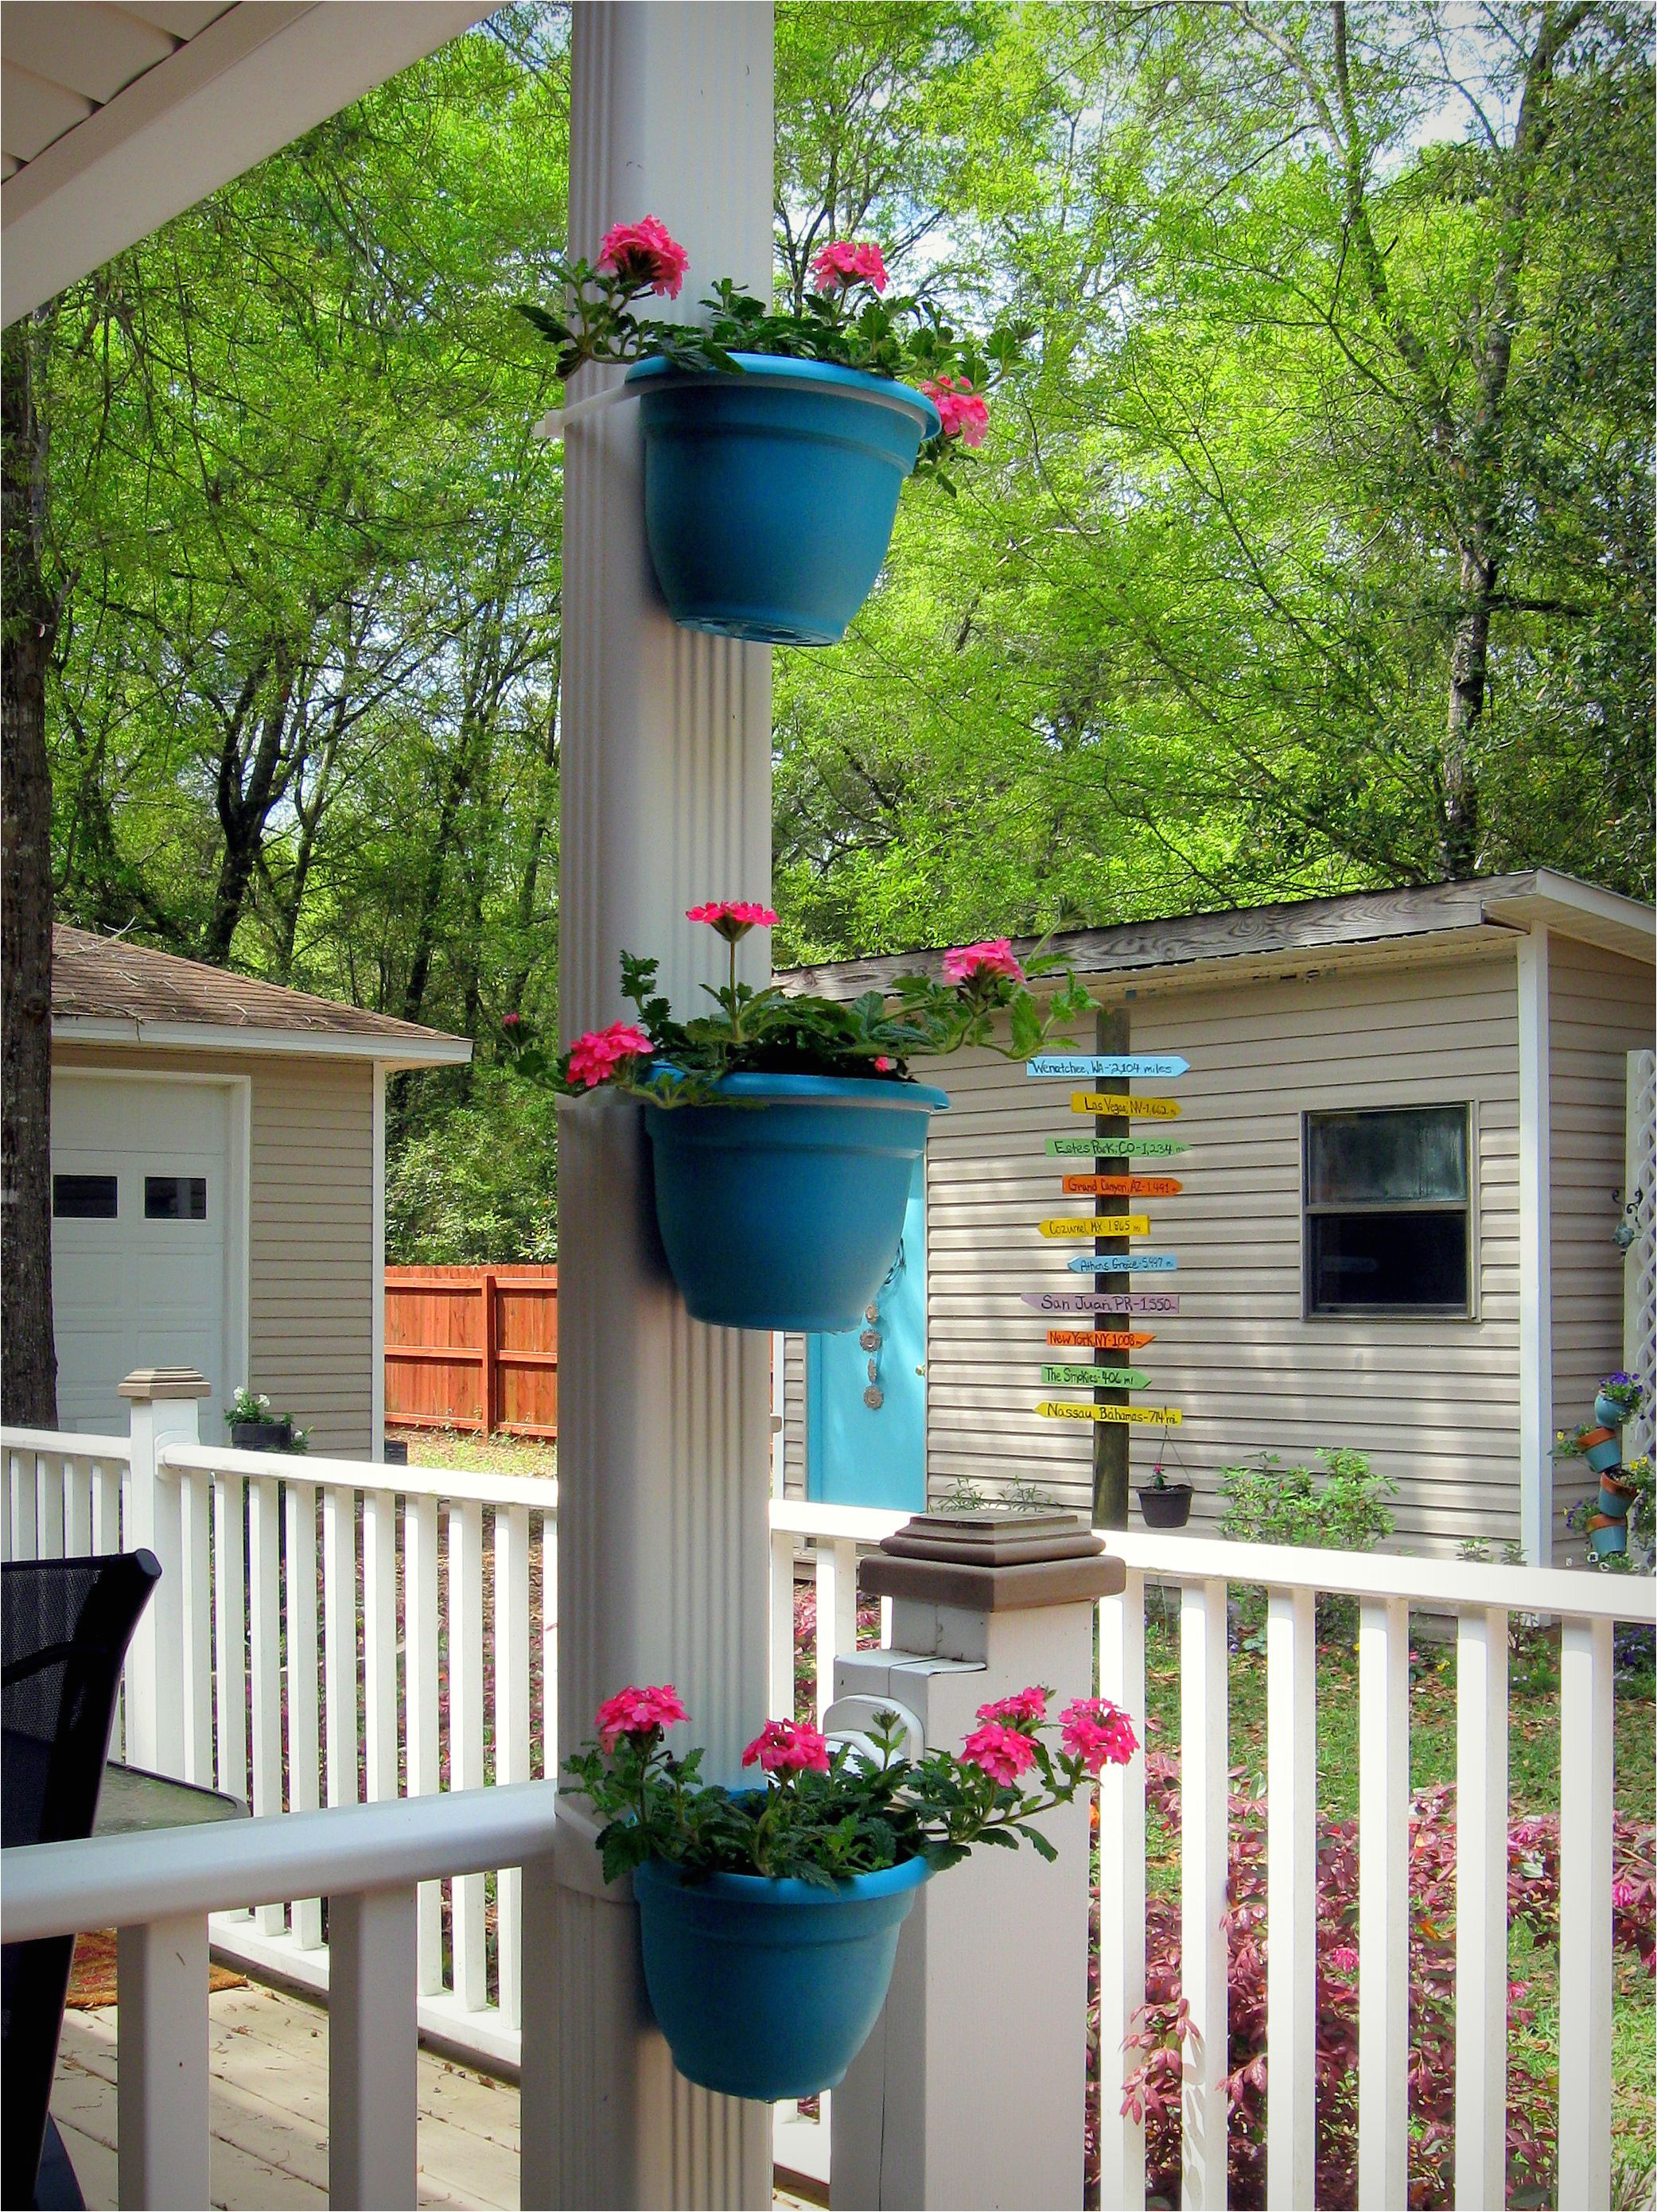 garden state gutter cleaning lovely drain pipe dress up use rain gutter drain pipes as vertical